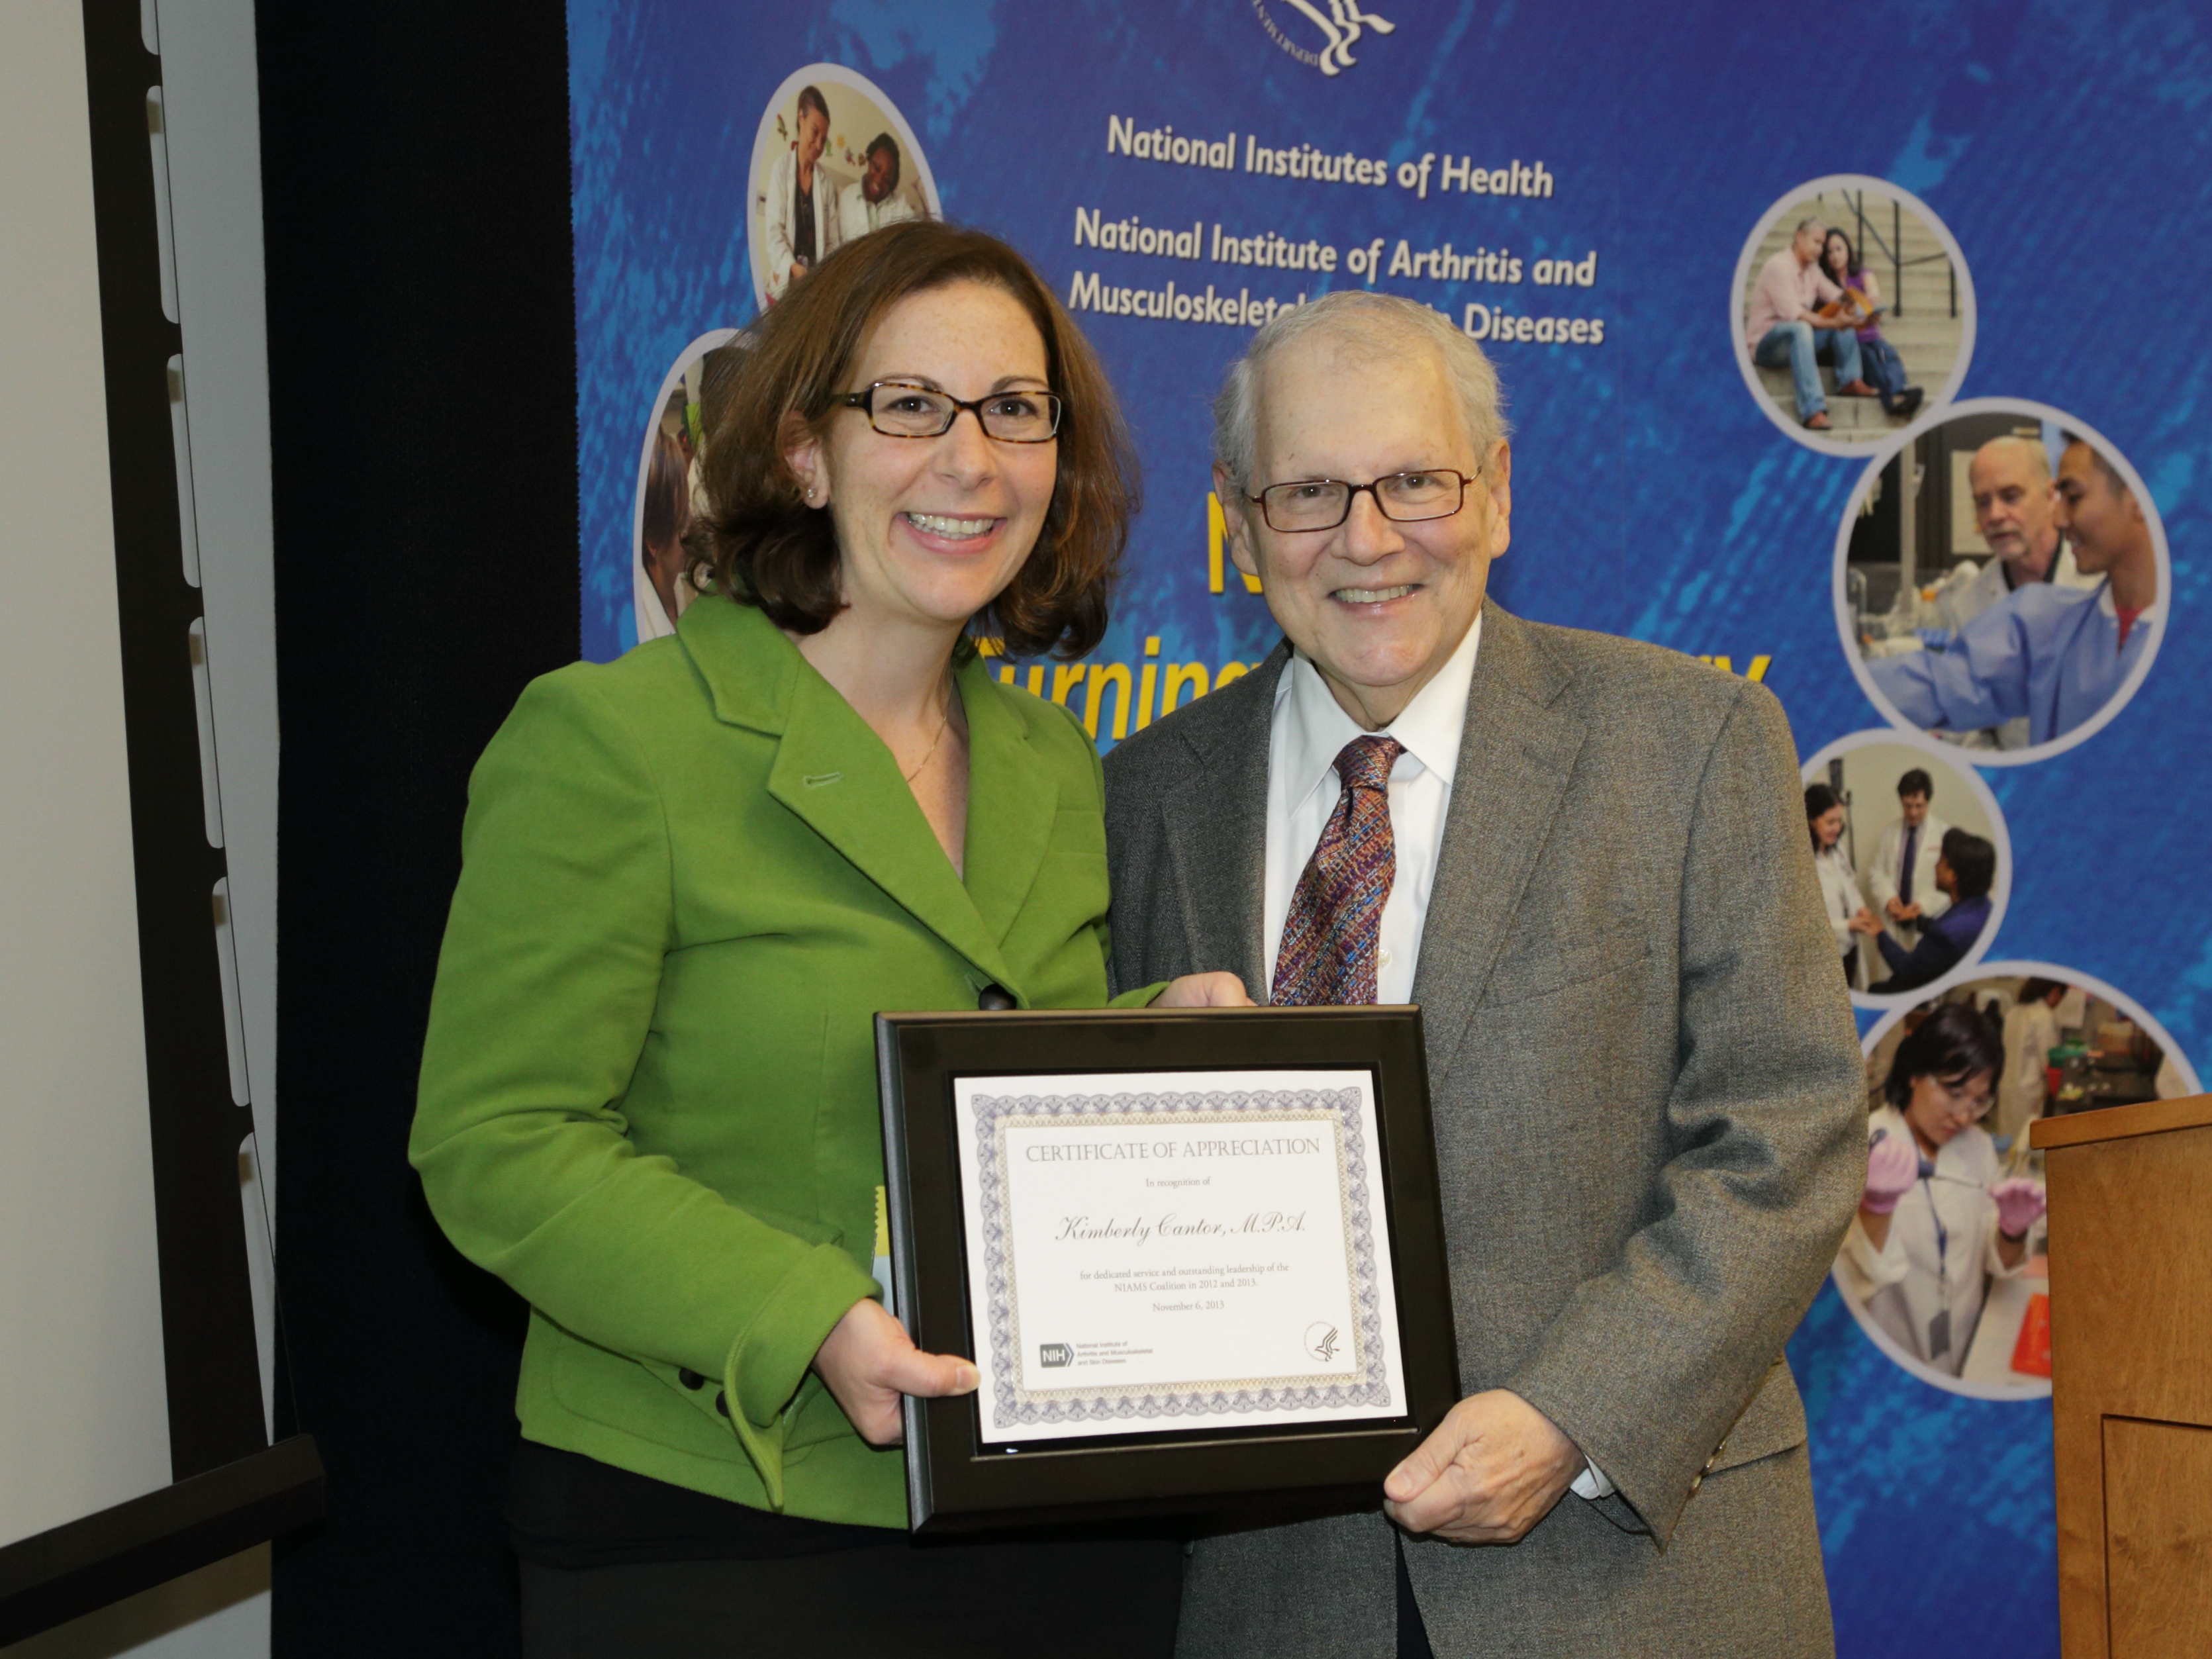 Photo of Kimberly Cantor and Dr. Katz